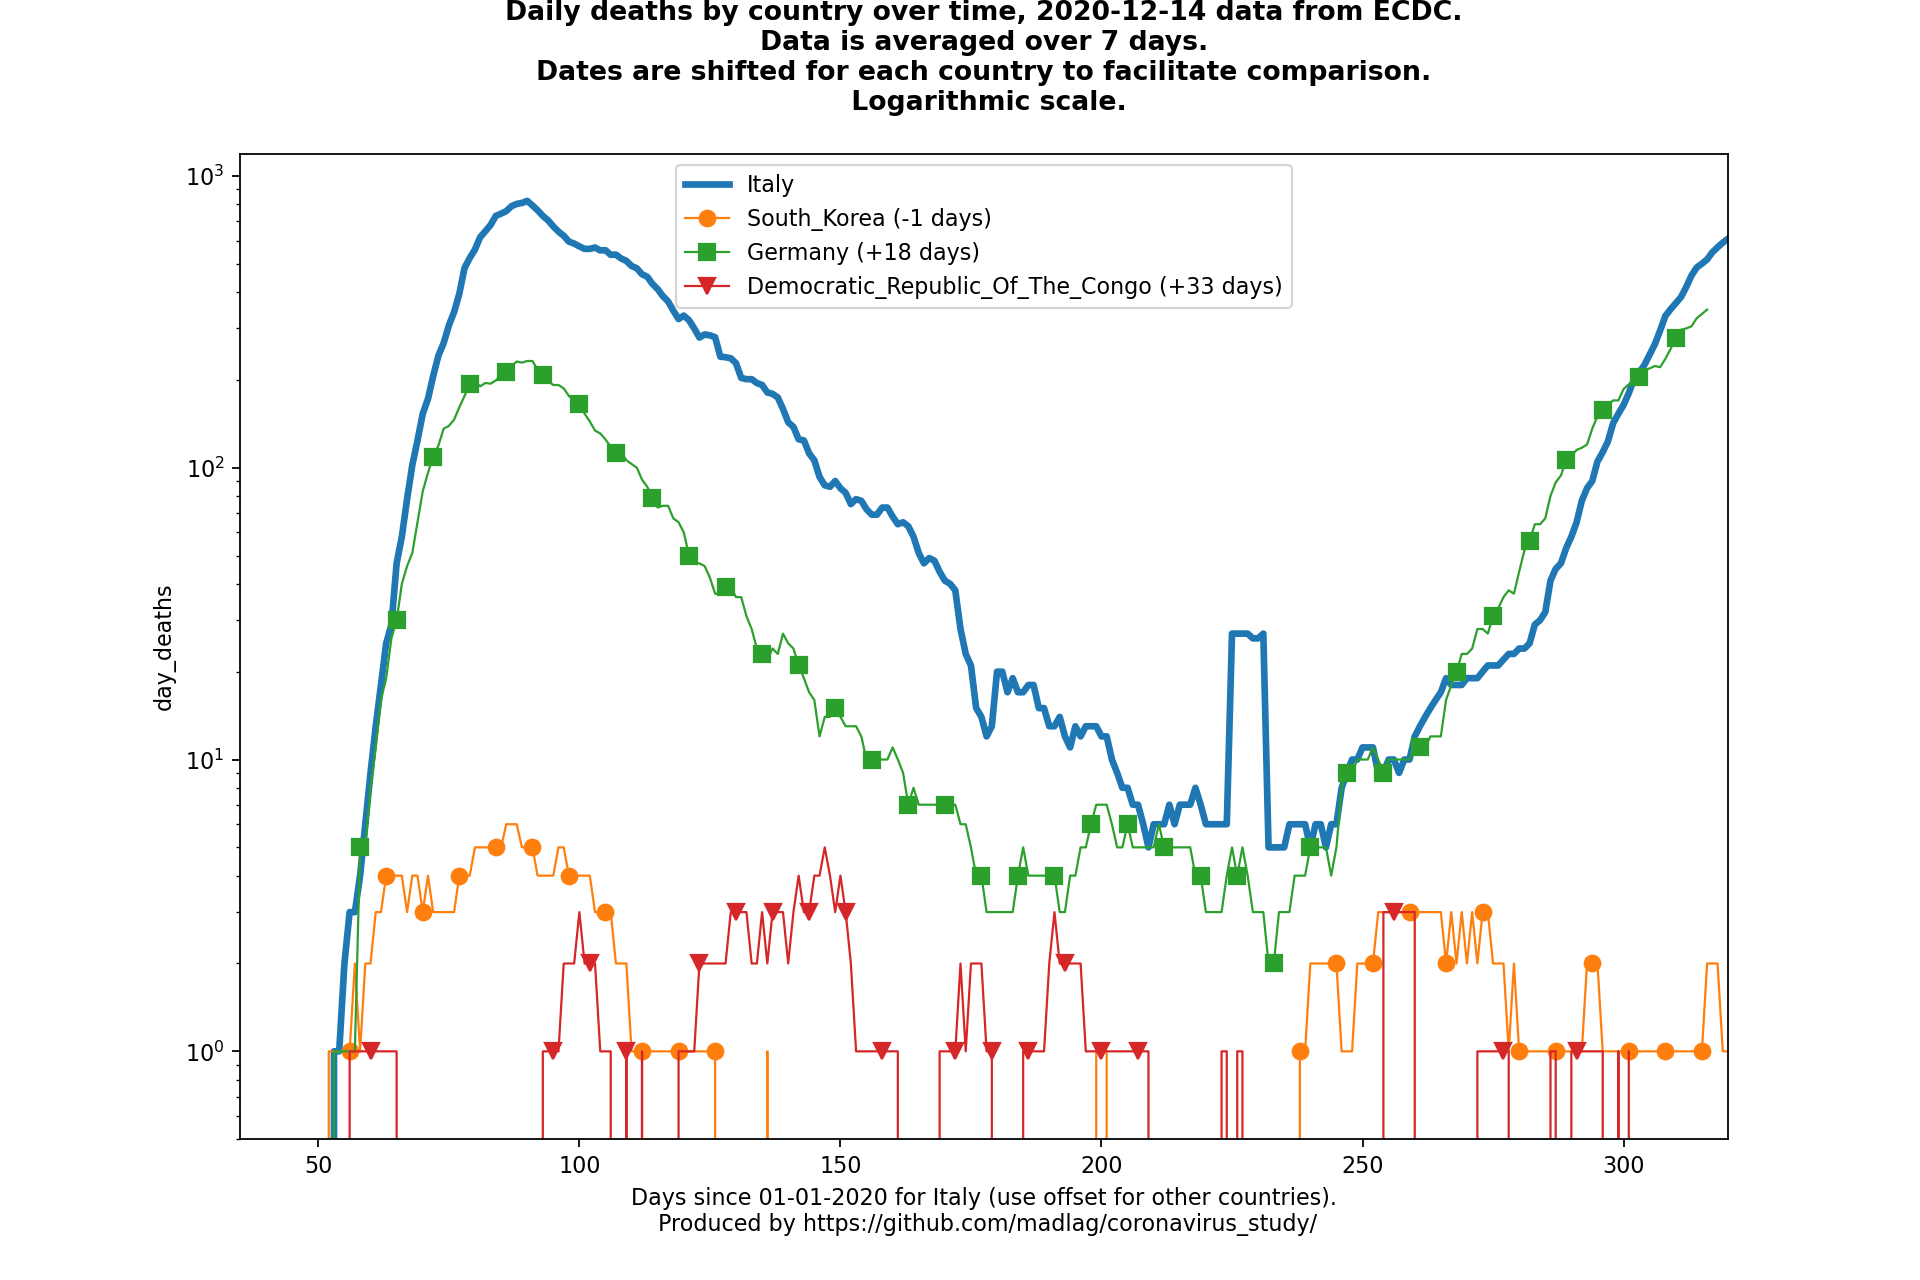 Democratic Republic Of The Congo covid-19 daily deaths animated chart